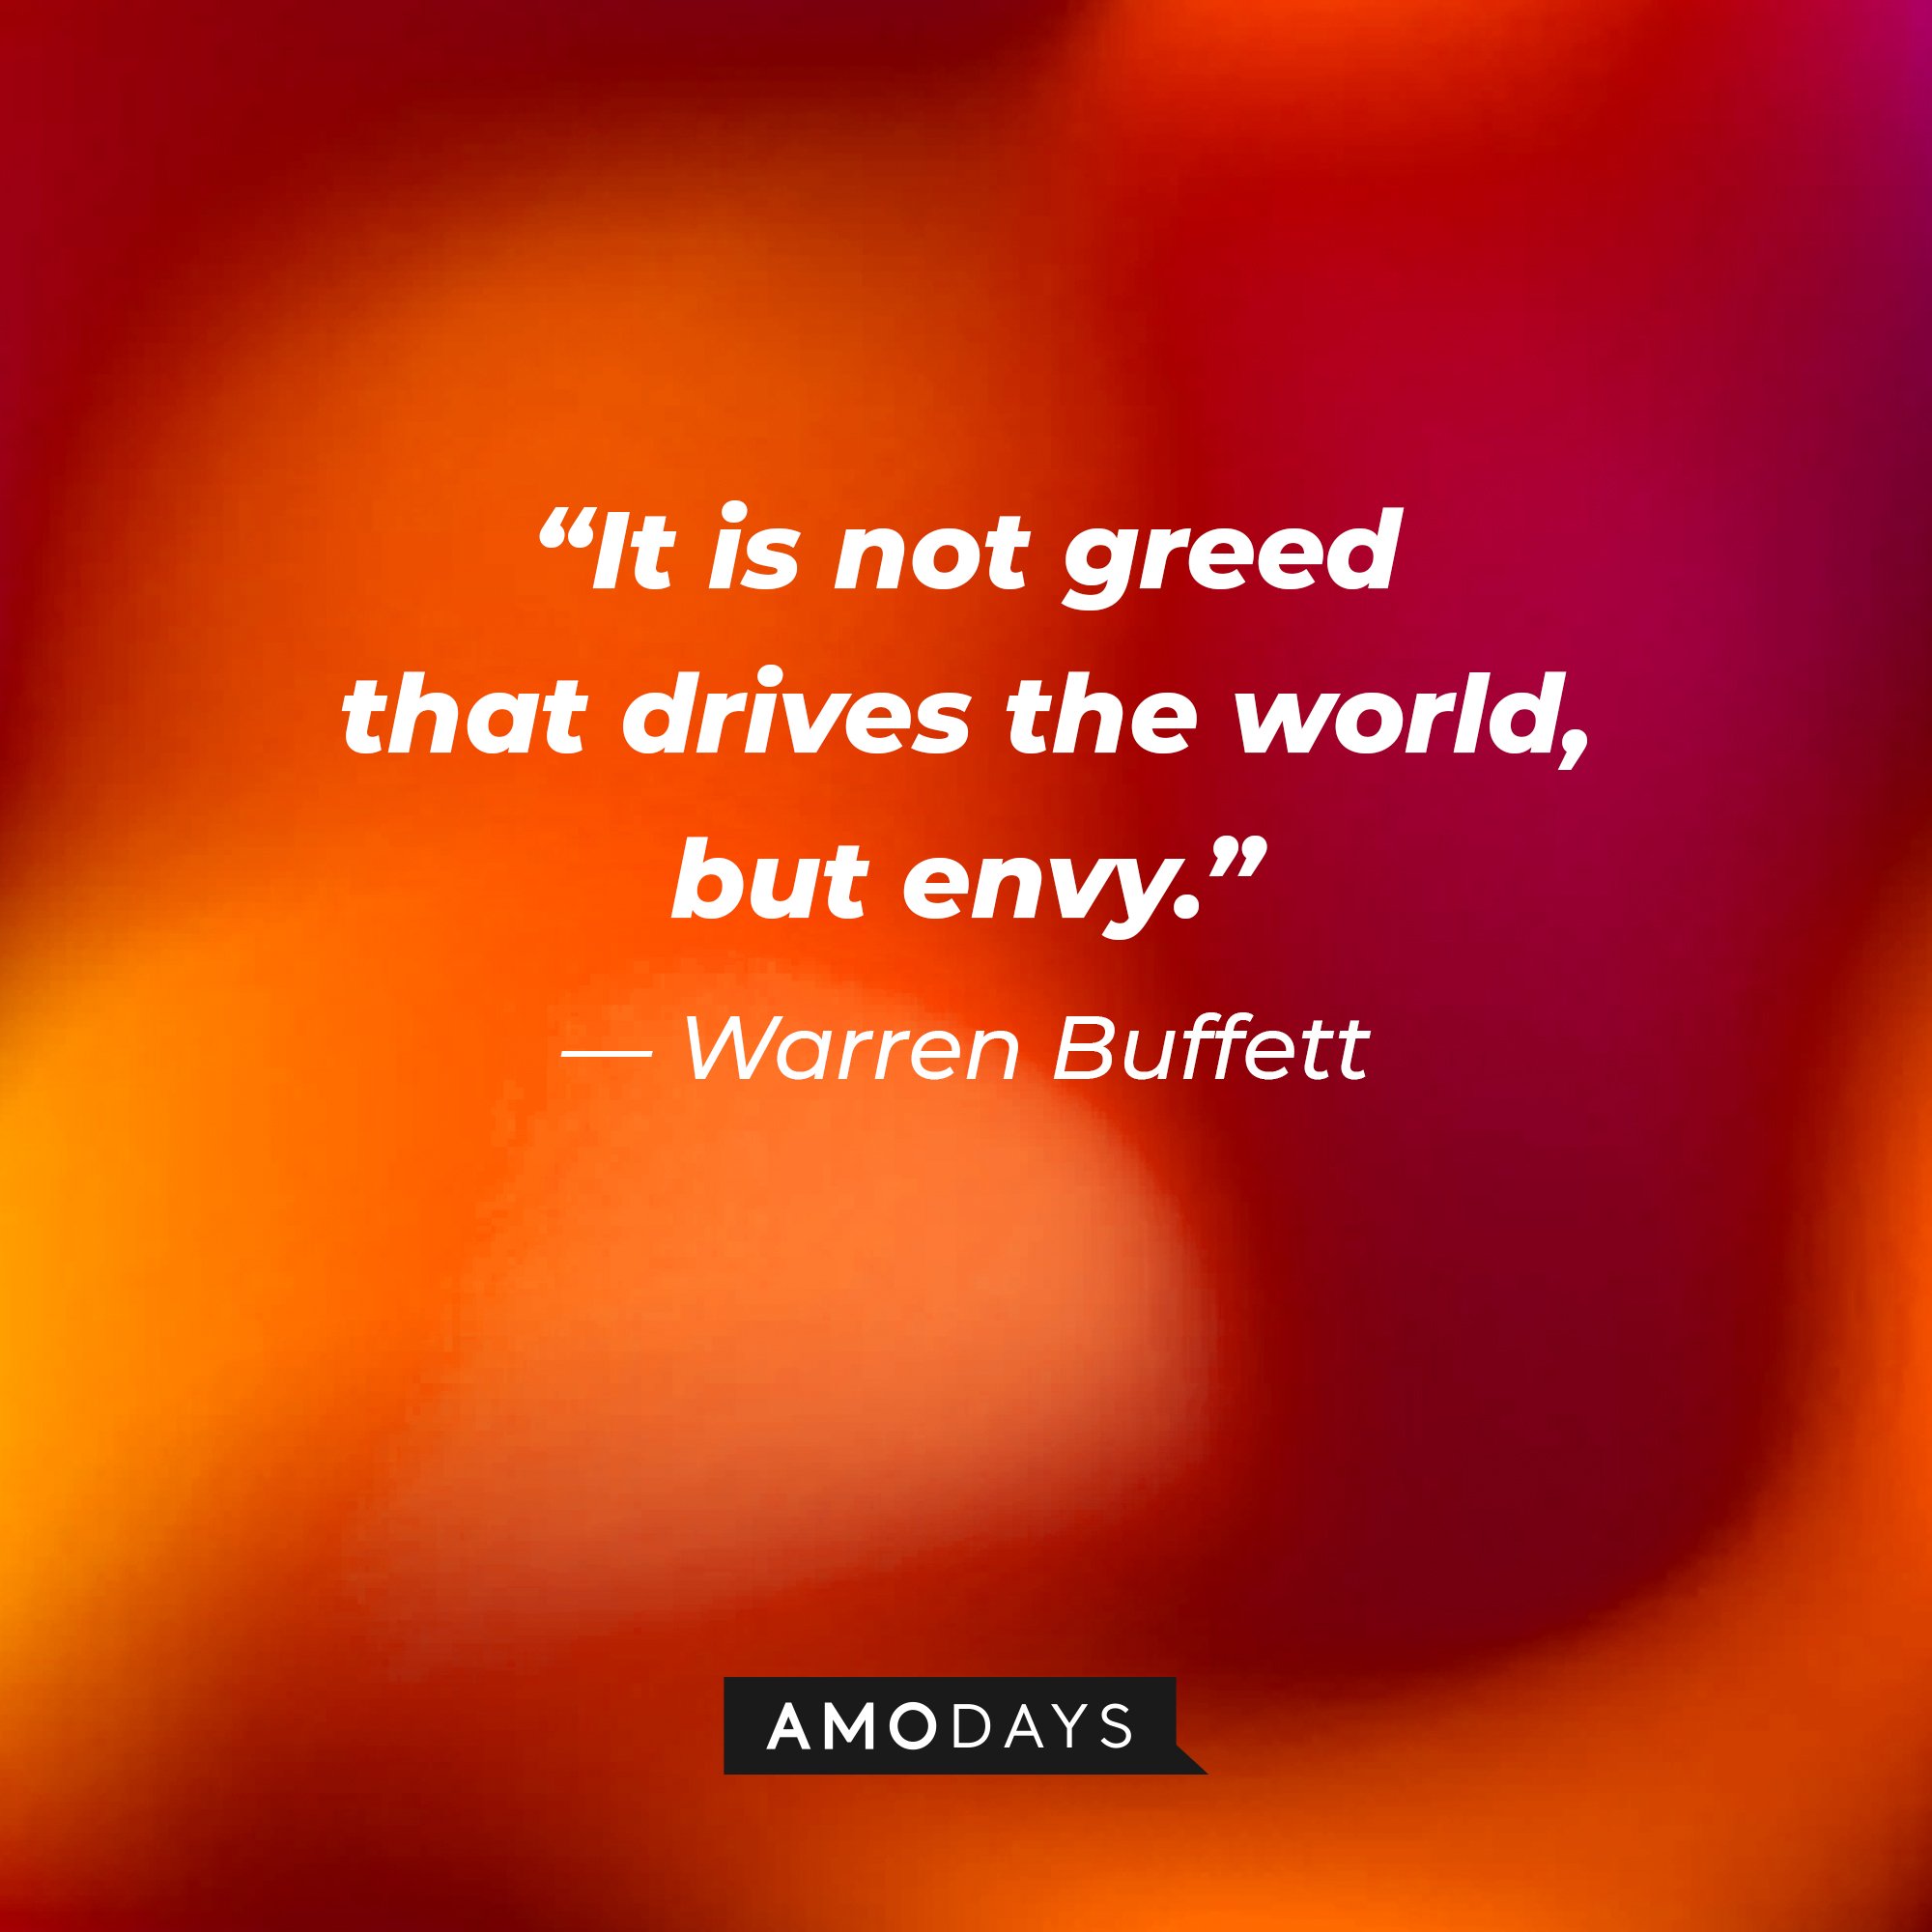  Warren Buffett's quote: “It is not greed that drives the world, but envy.” | Image: AmoDays